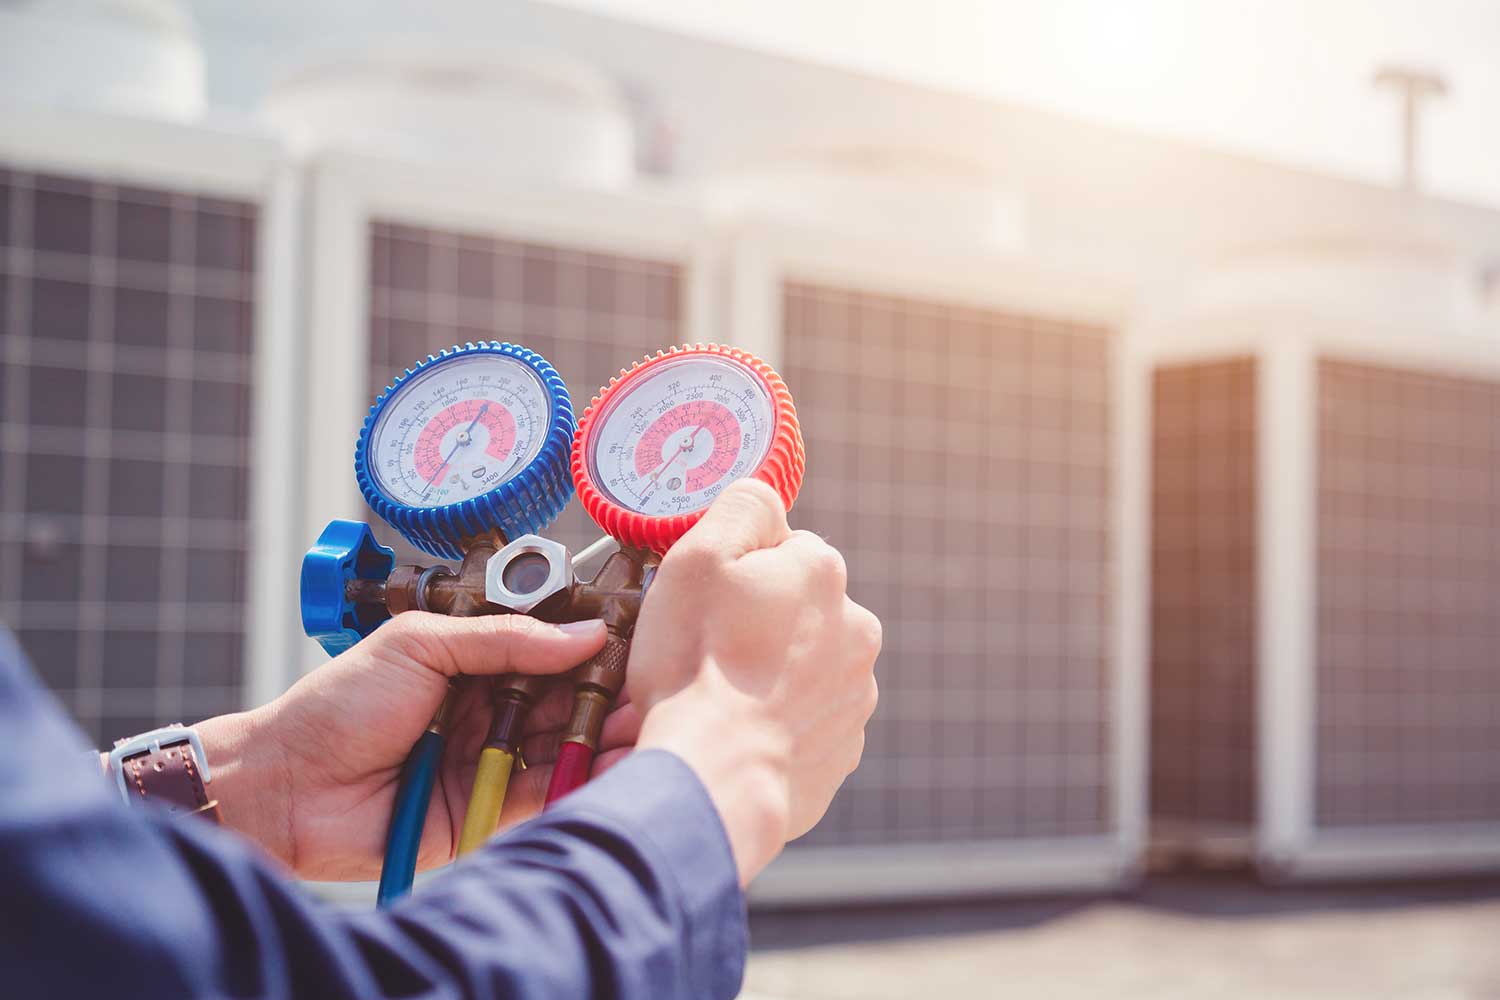 You must have the right size HVAC unit for your home or you may not be getting enough heat